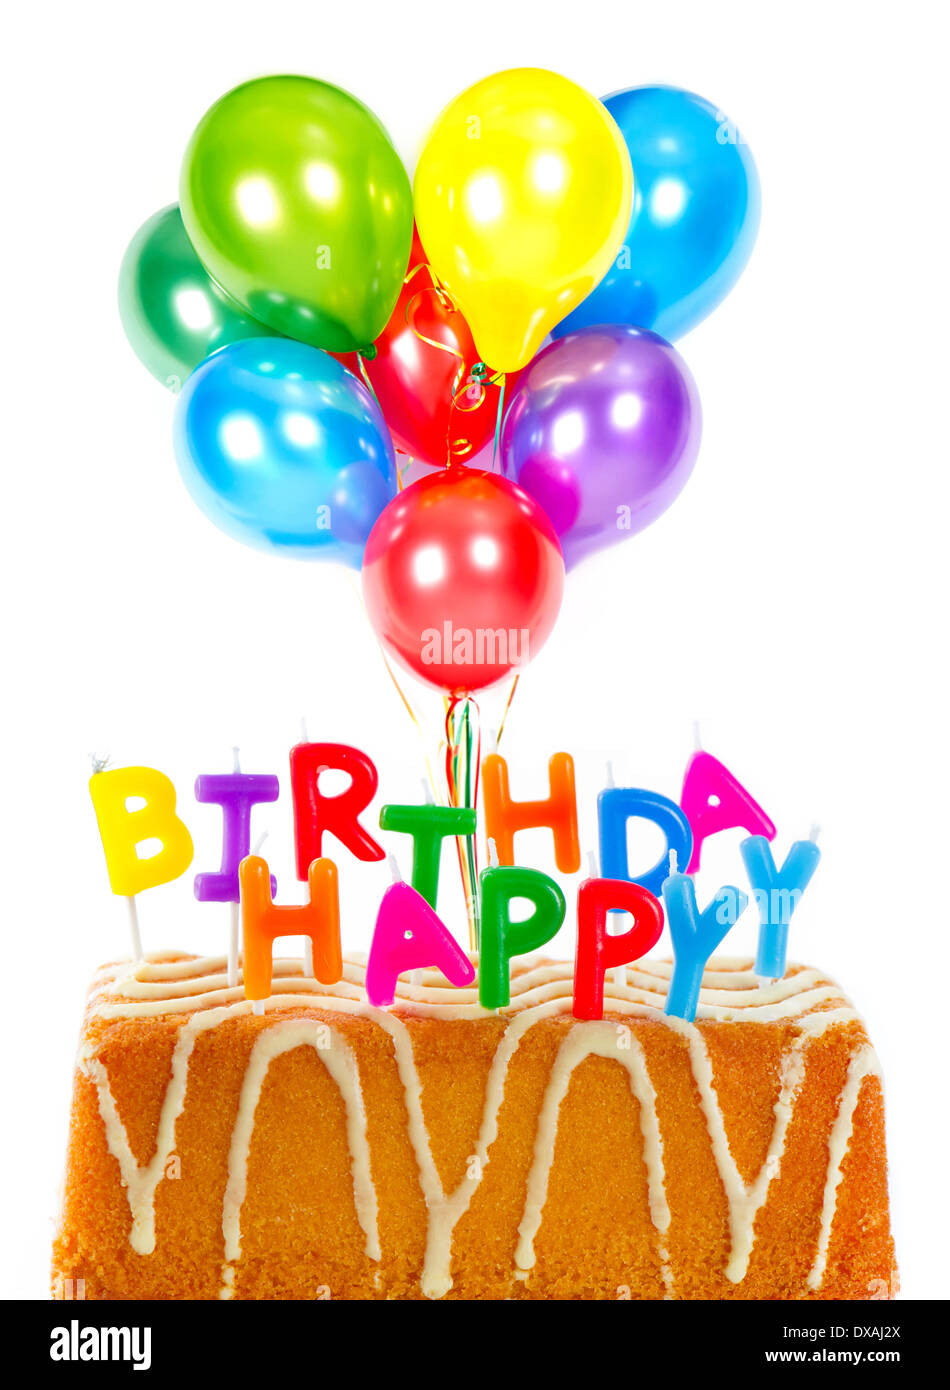 happy birthday. birthday cake with candles and colorful balloons Stock Photo